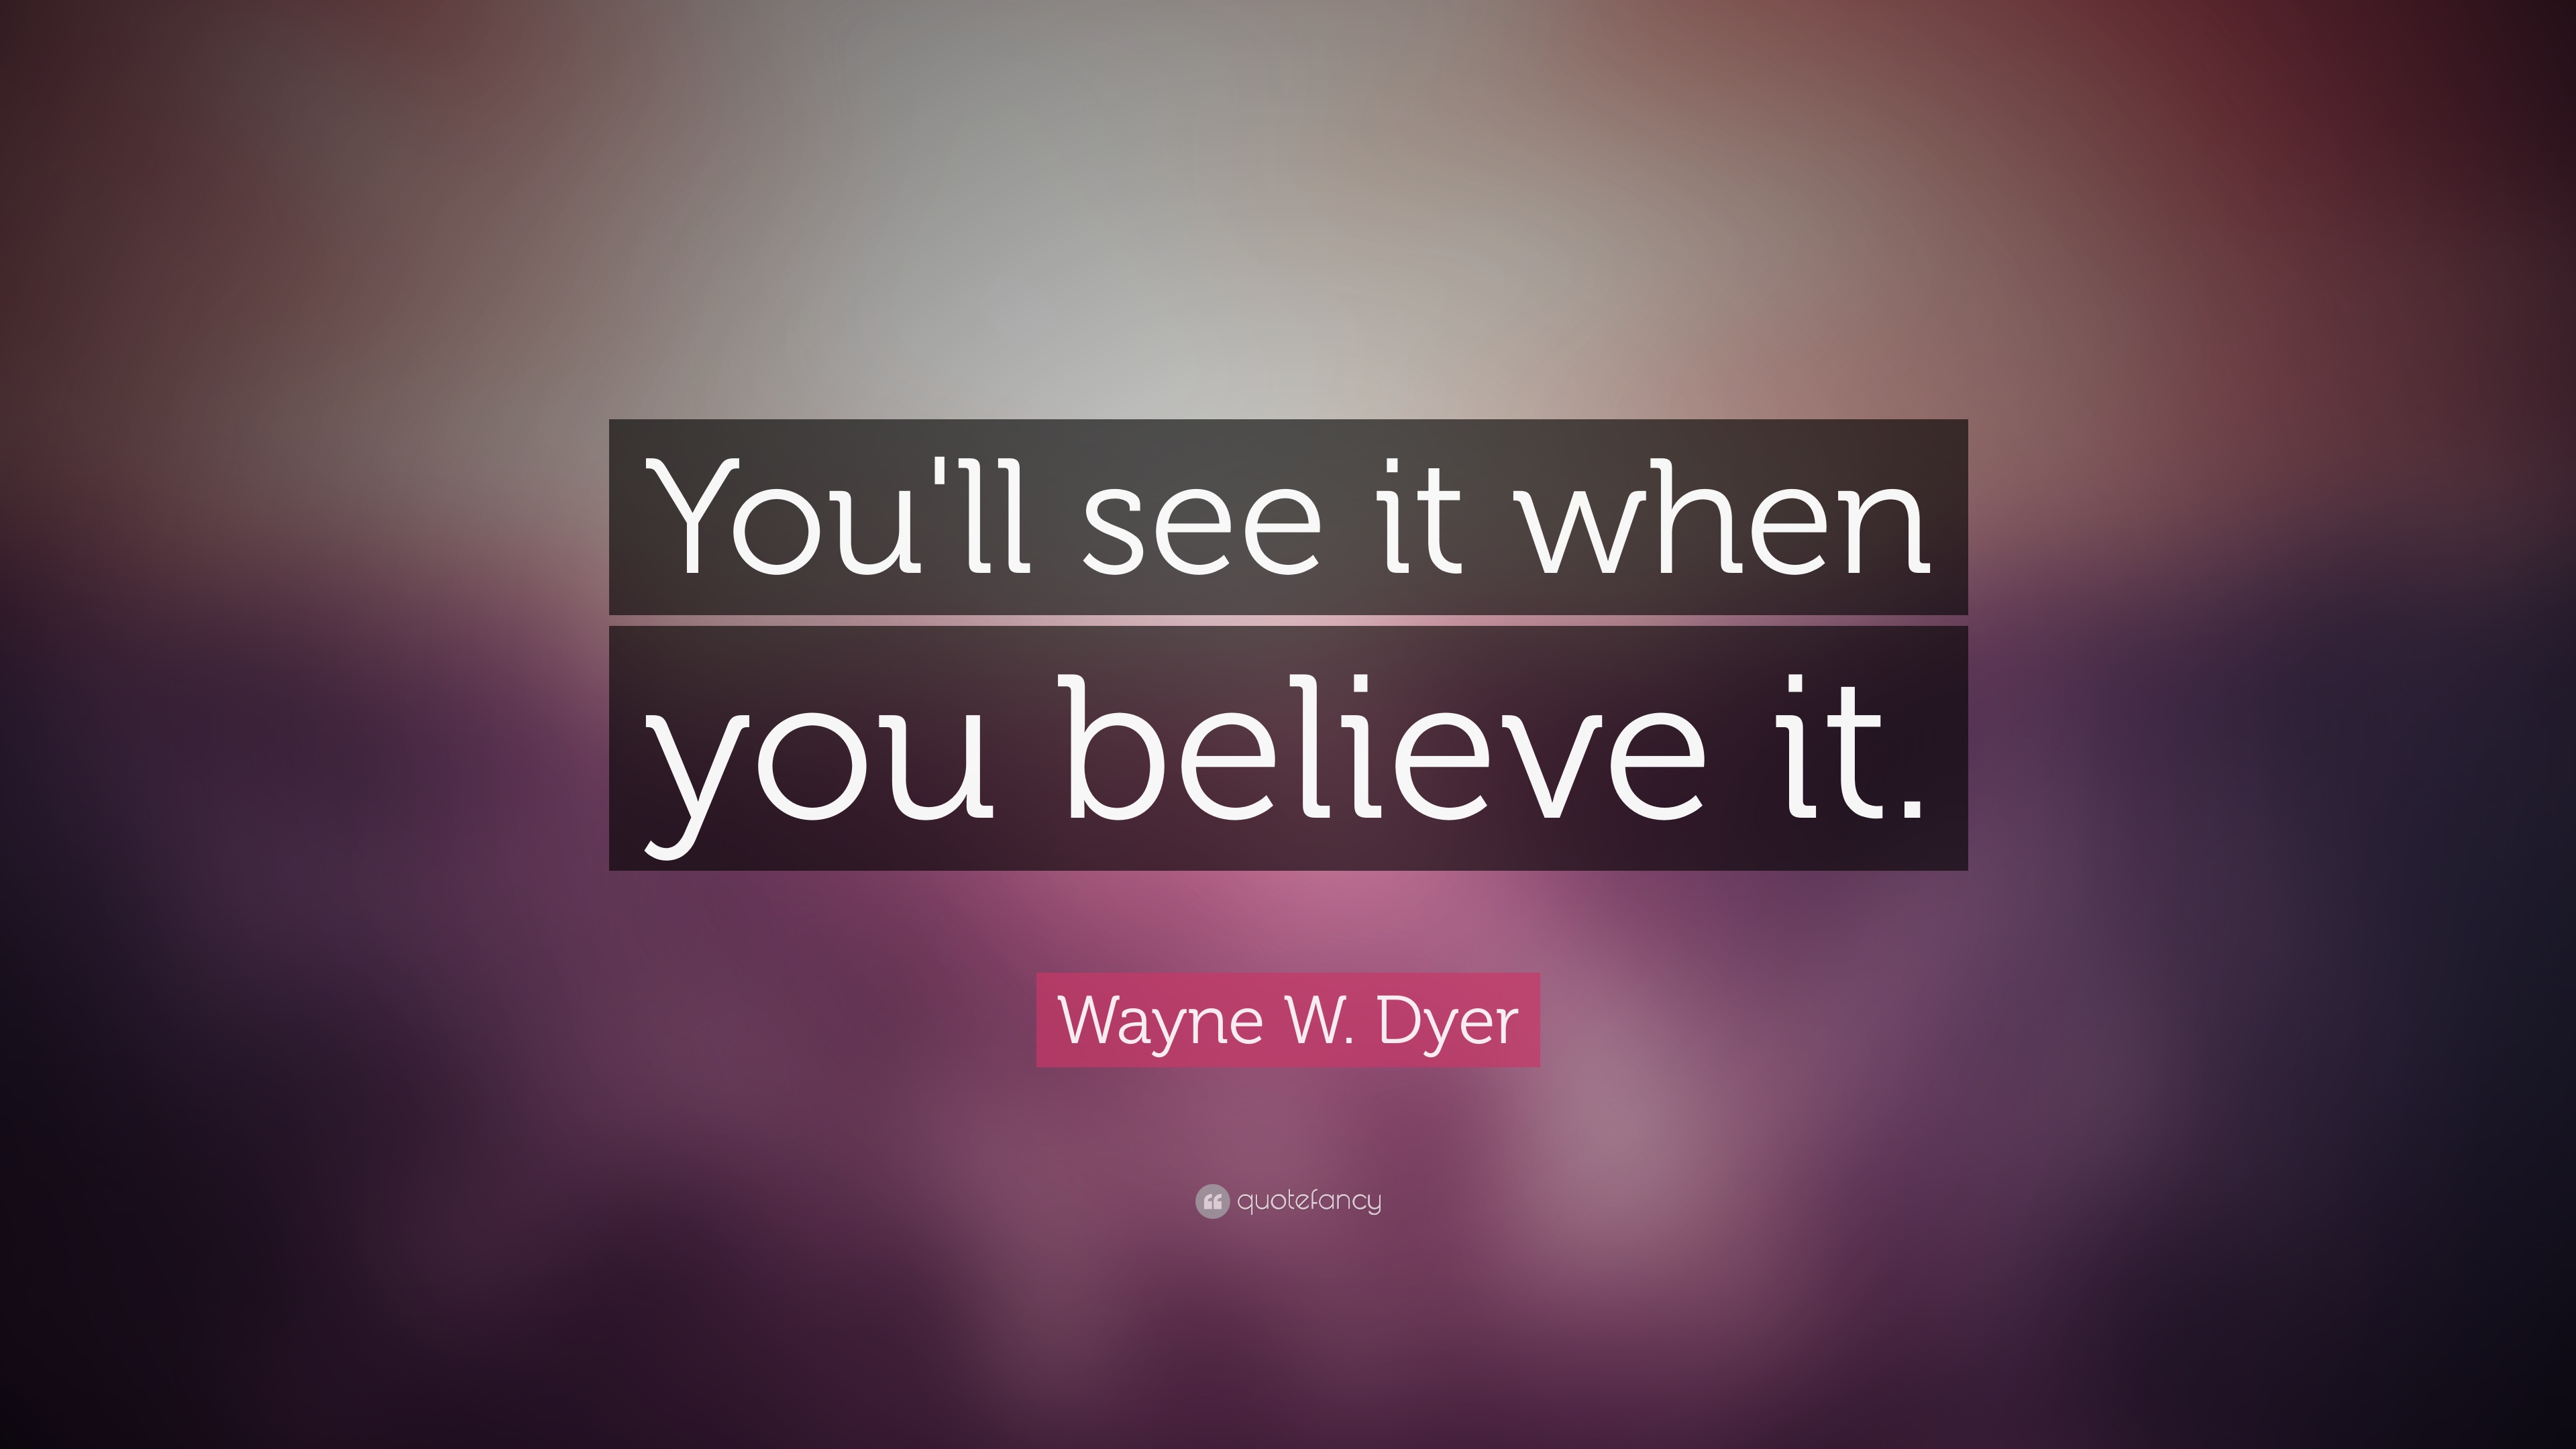 13345-Wayne-W-Dyer-Quote-You-ll-see-it-when-you-believe-it